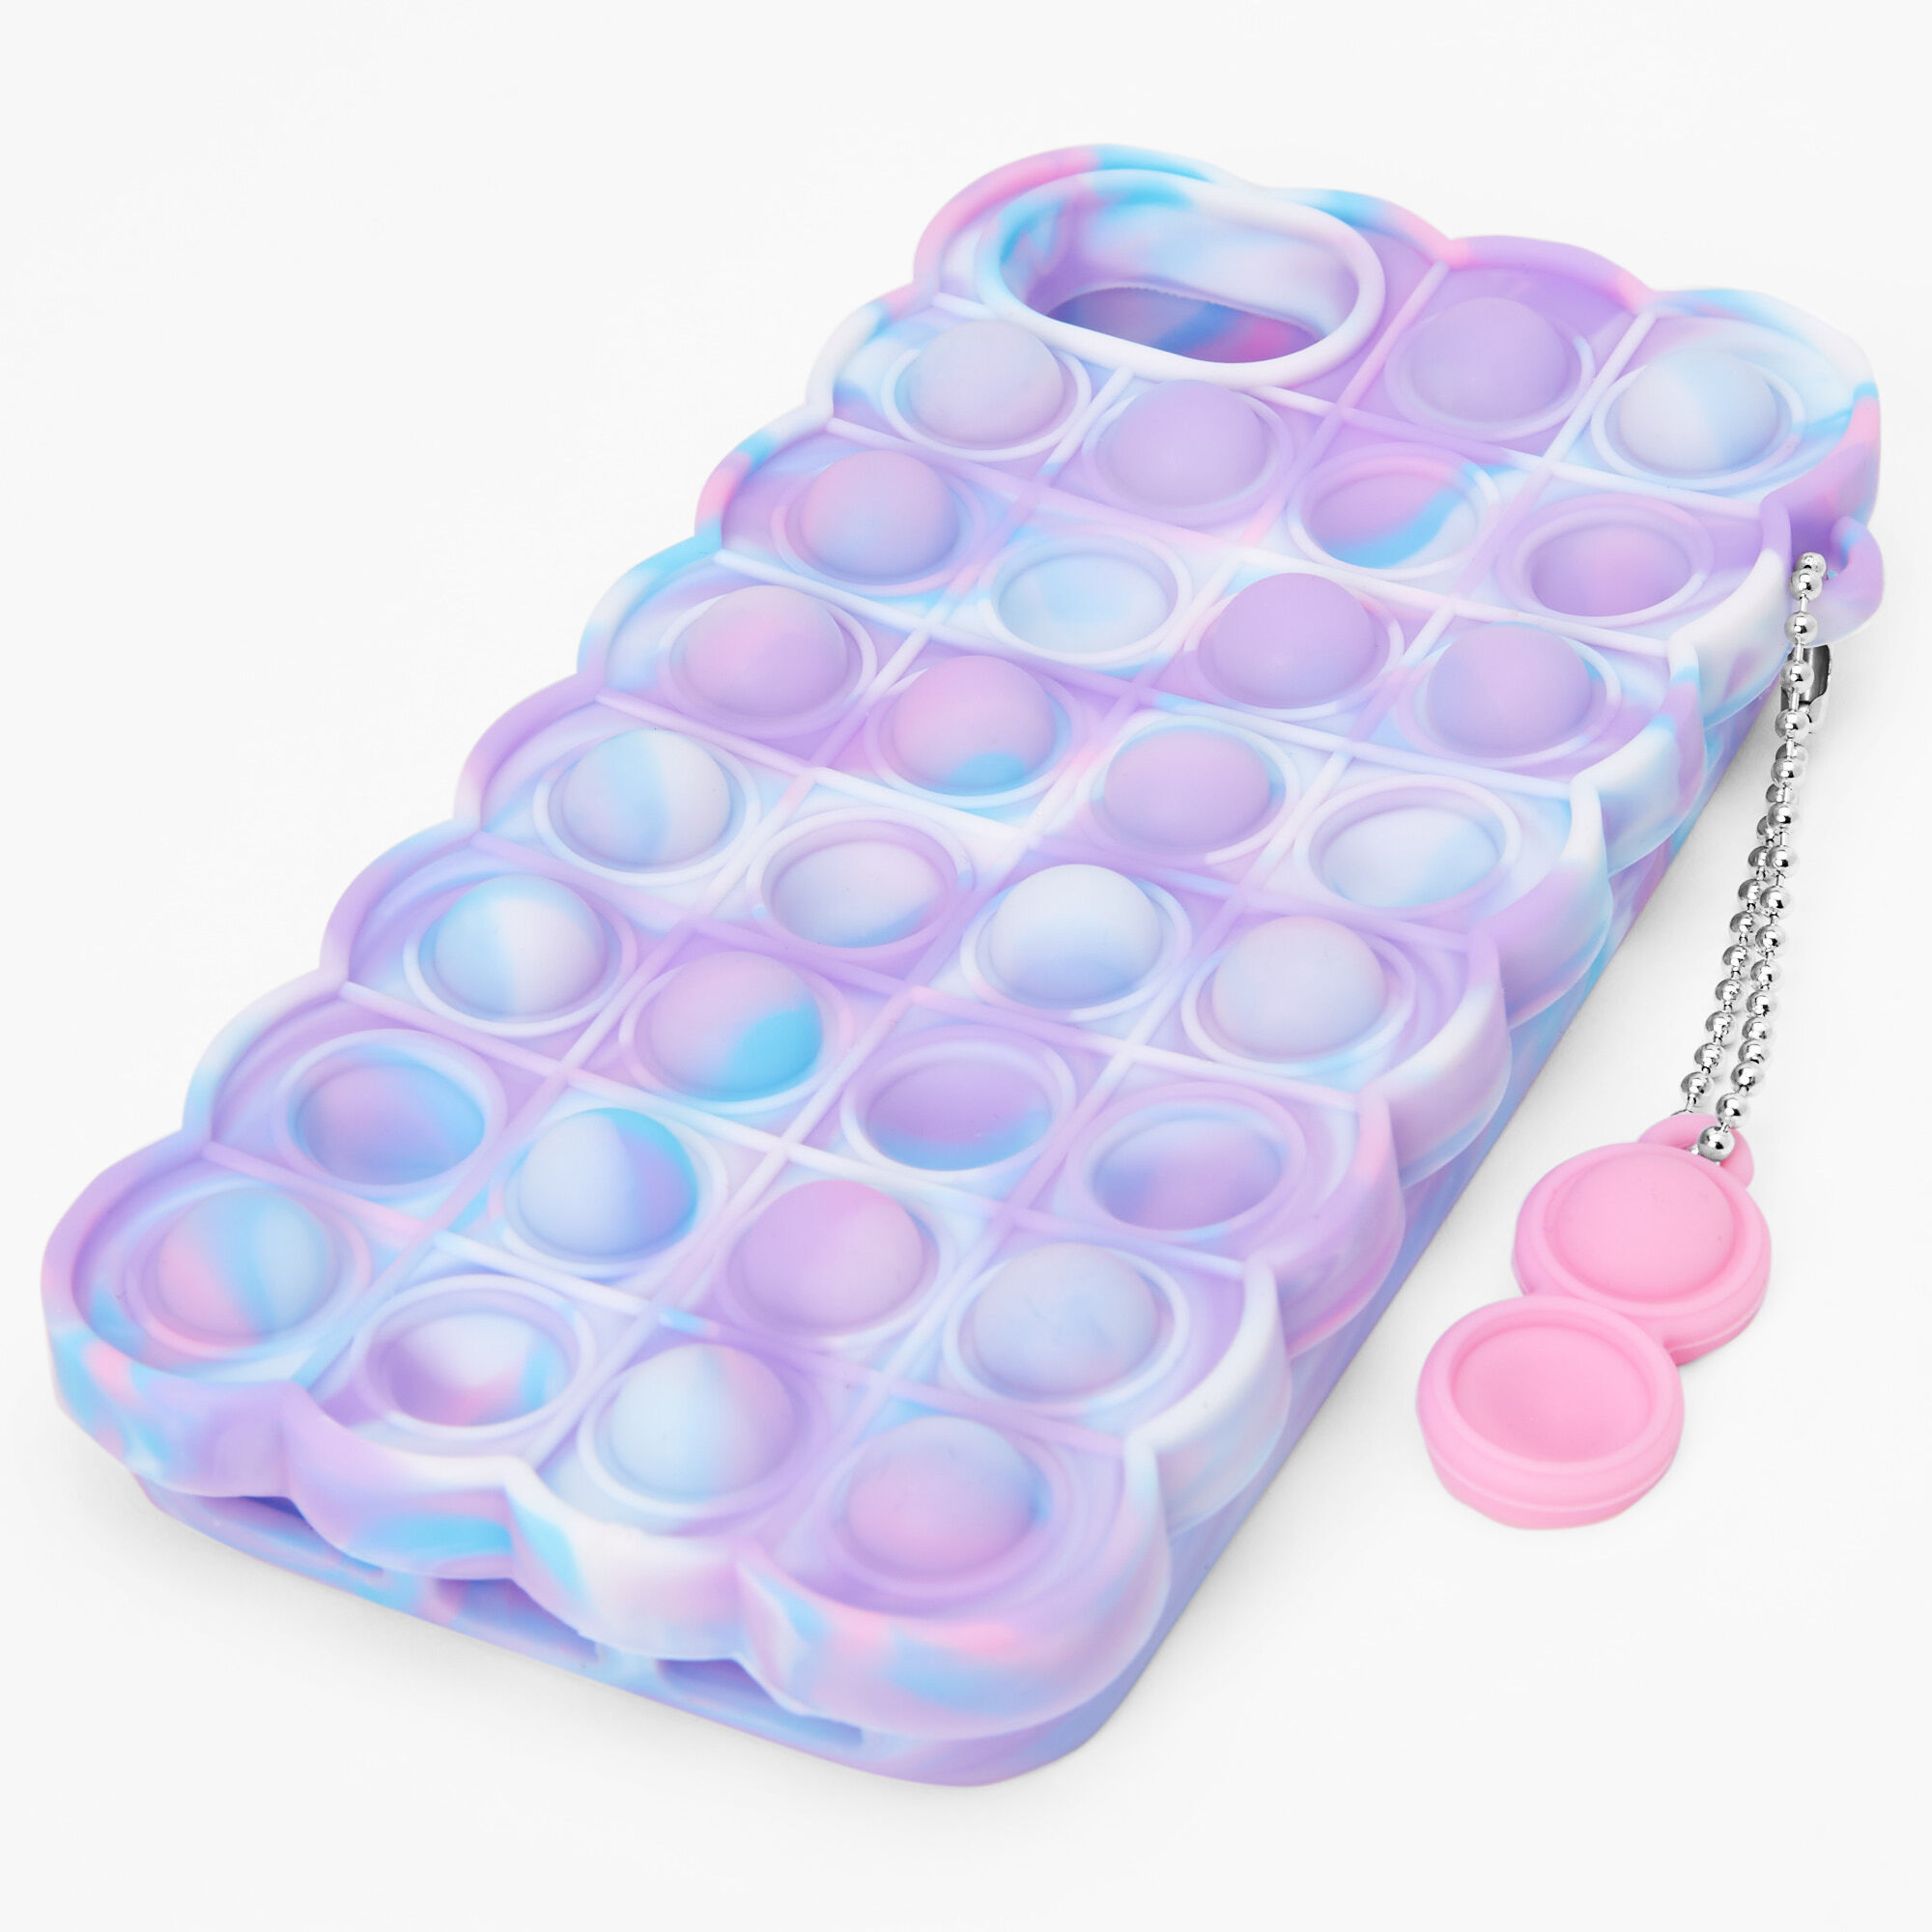 Popper Marbled Silicone Phone Case - Fits iPhone 6/7/8/SE | Claire's